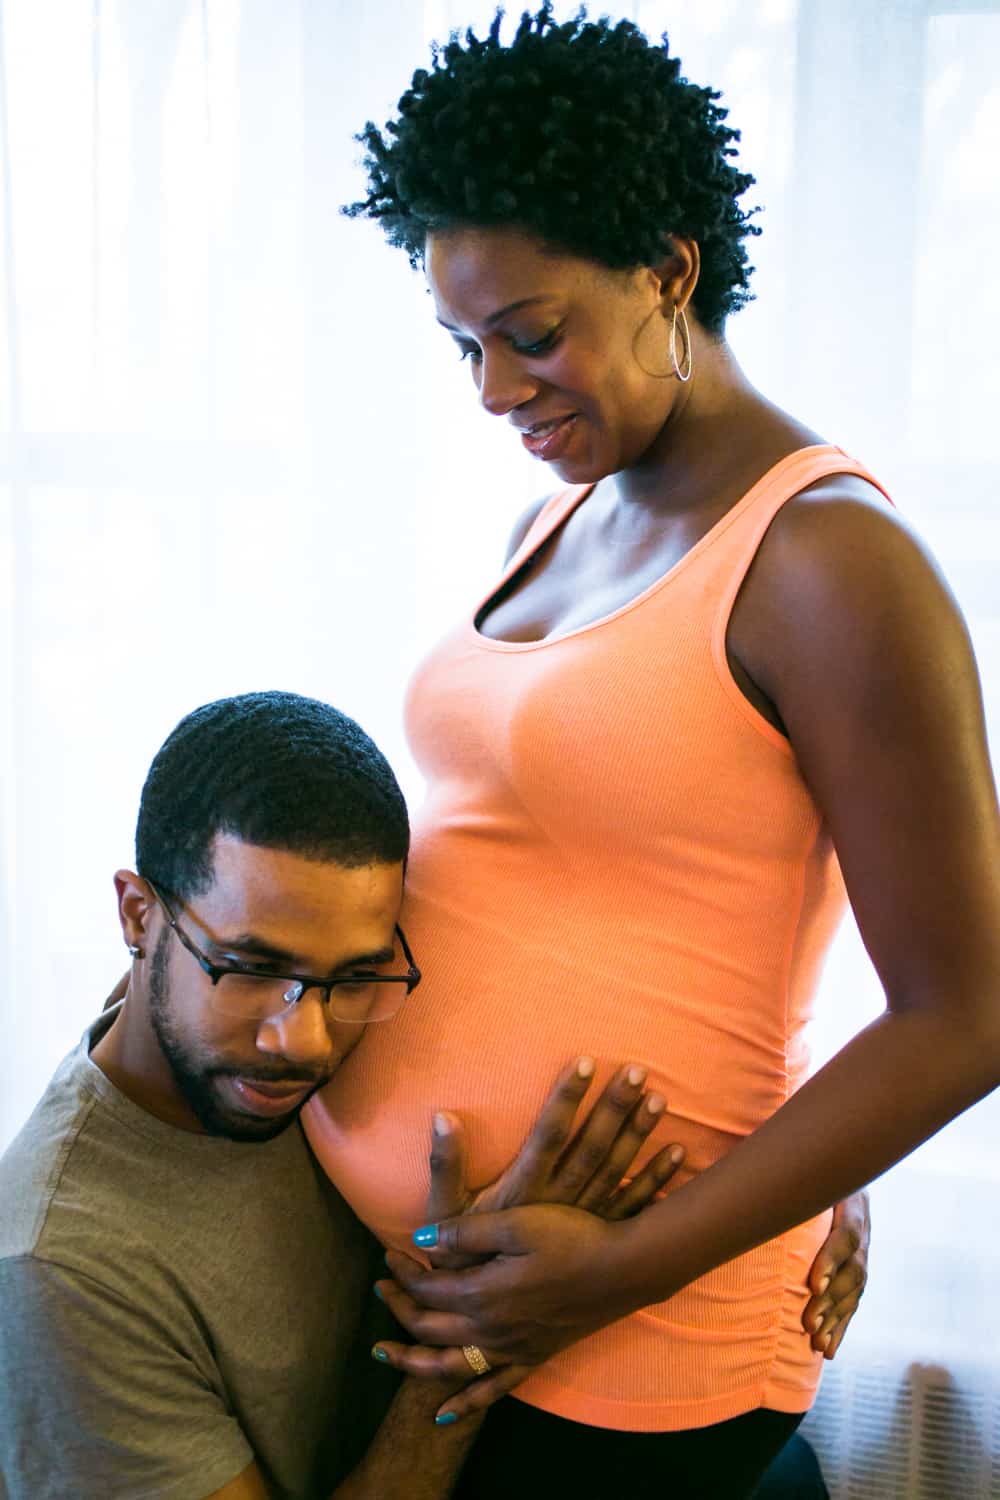 Father-to-be listening to pregnant woman's stomach for a Queens maternity photo shoot